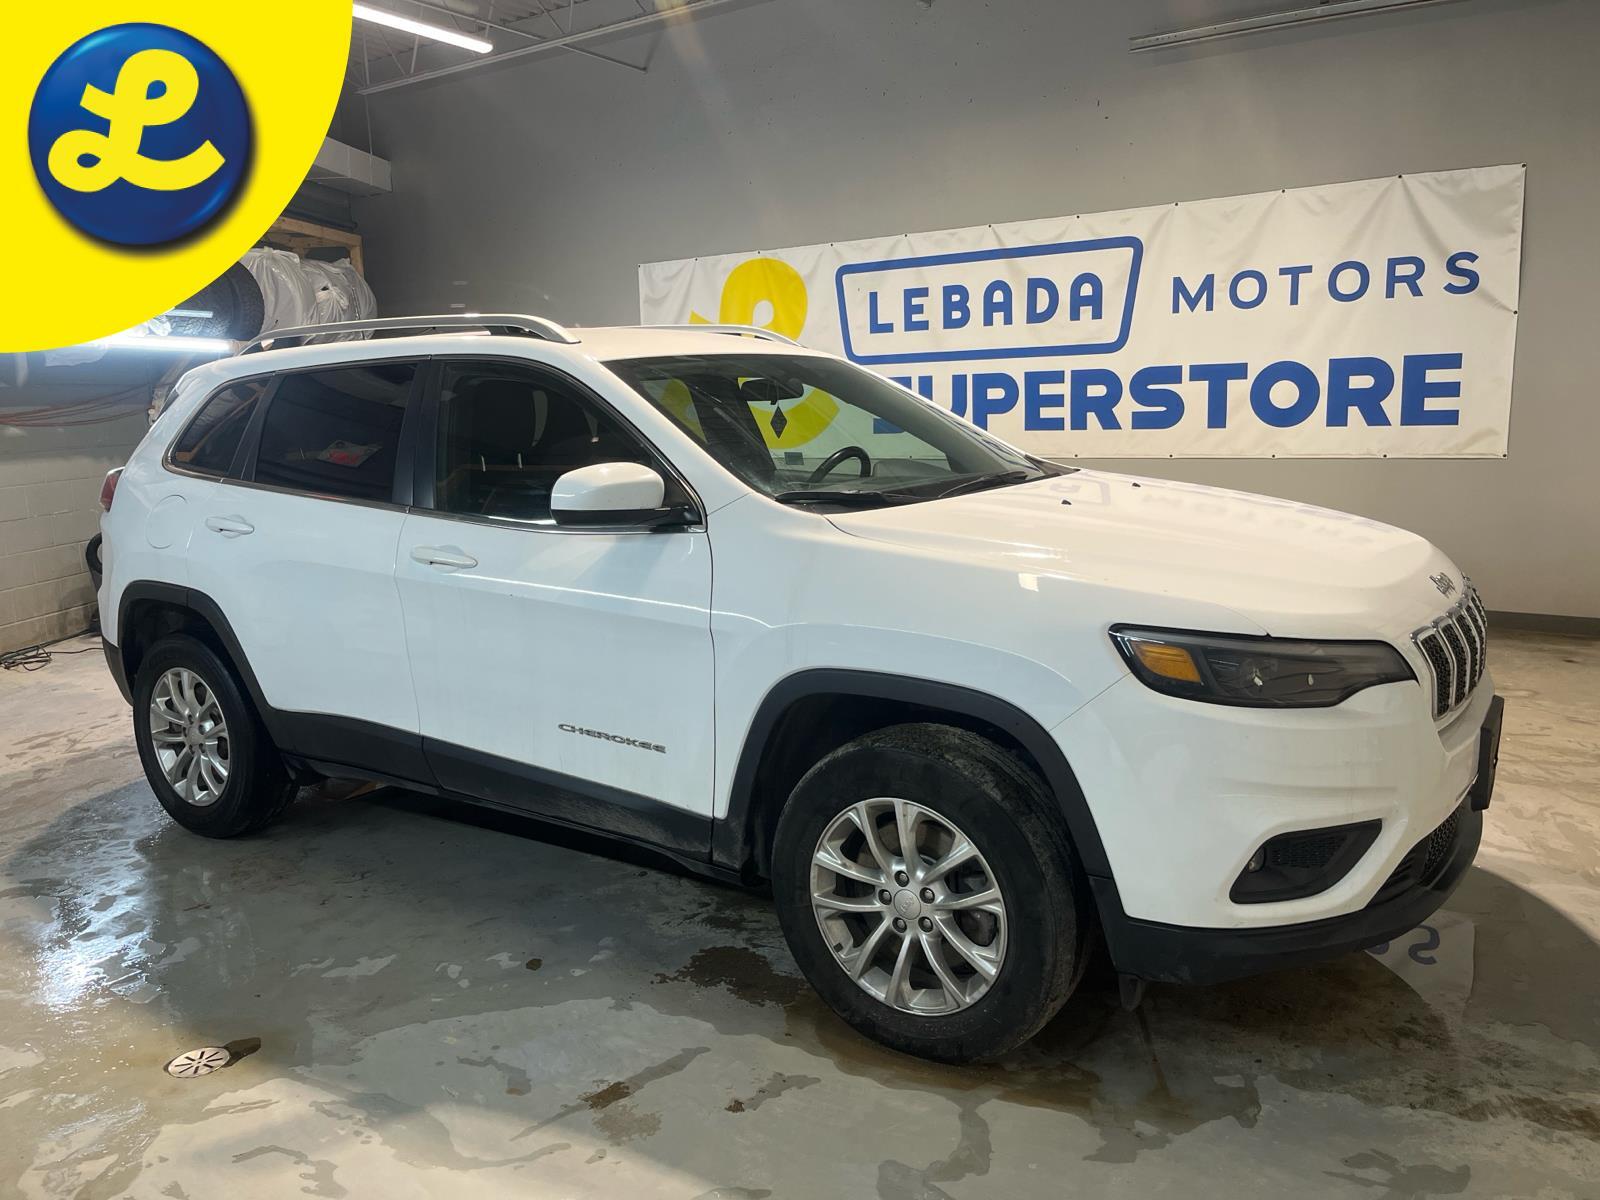 2019 Jeep Cherokee North 4 X 4  17 inch Alloy Wheels  Front Fog Lamps